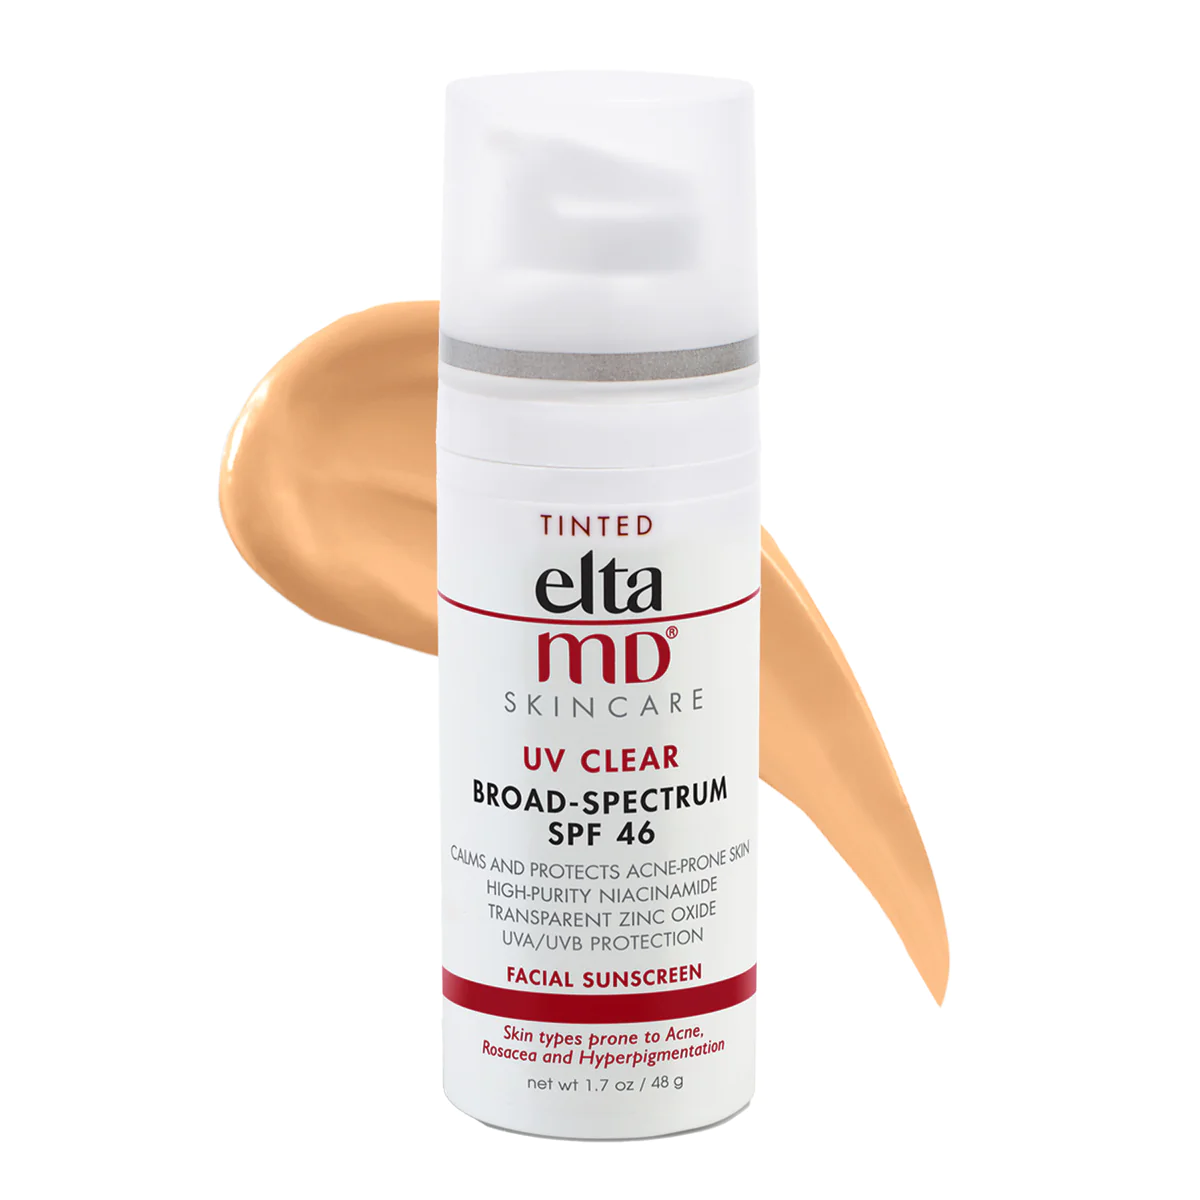 UV Clear Tinted Facial Sunscreen SPF 46 by Elta MD, sheer and lightweight sun protection.